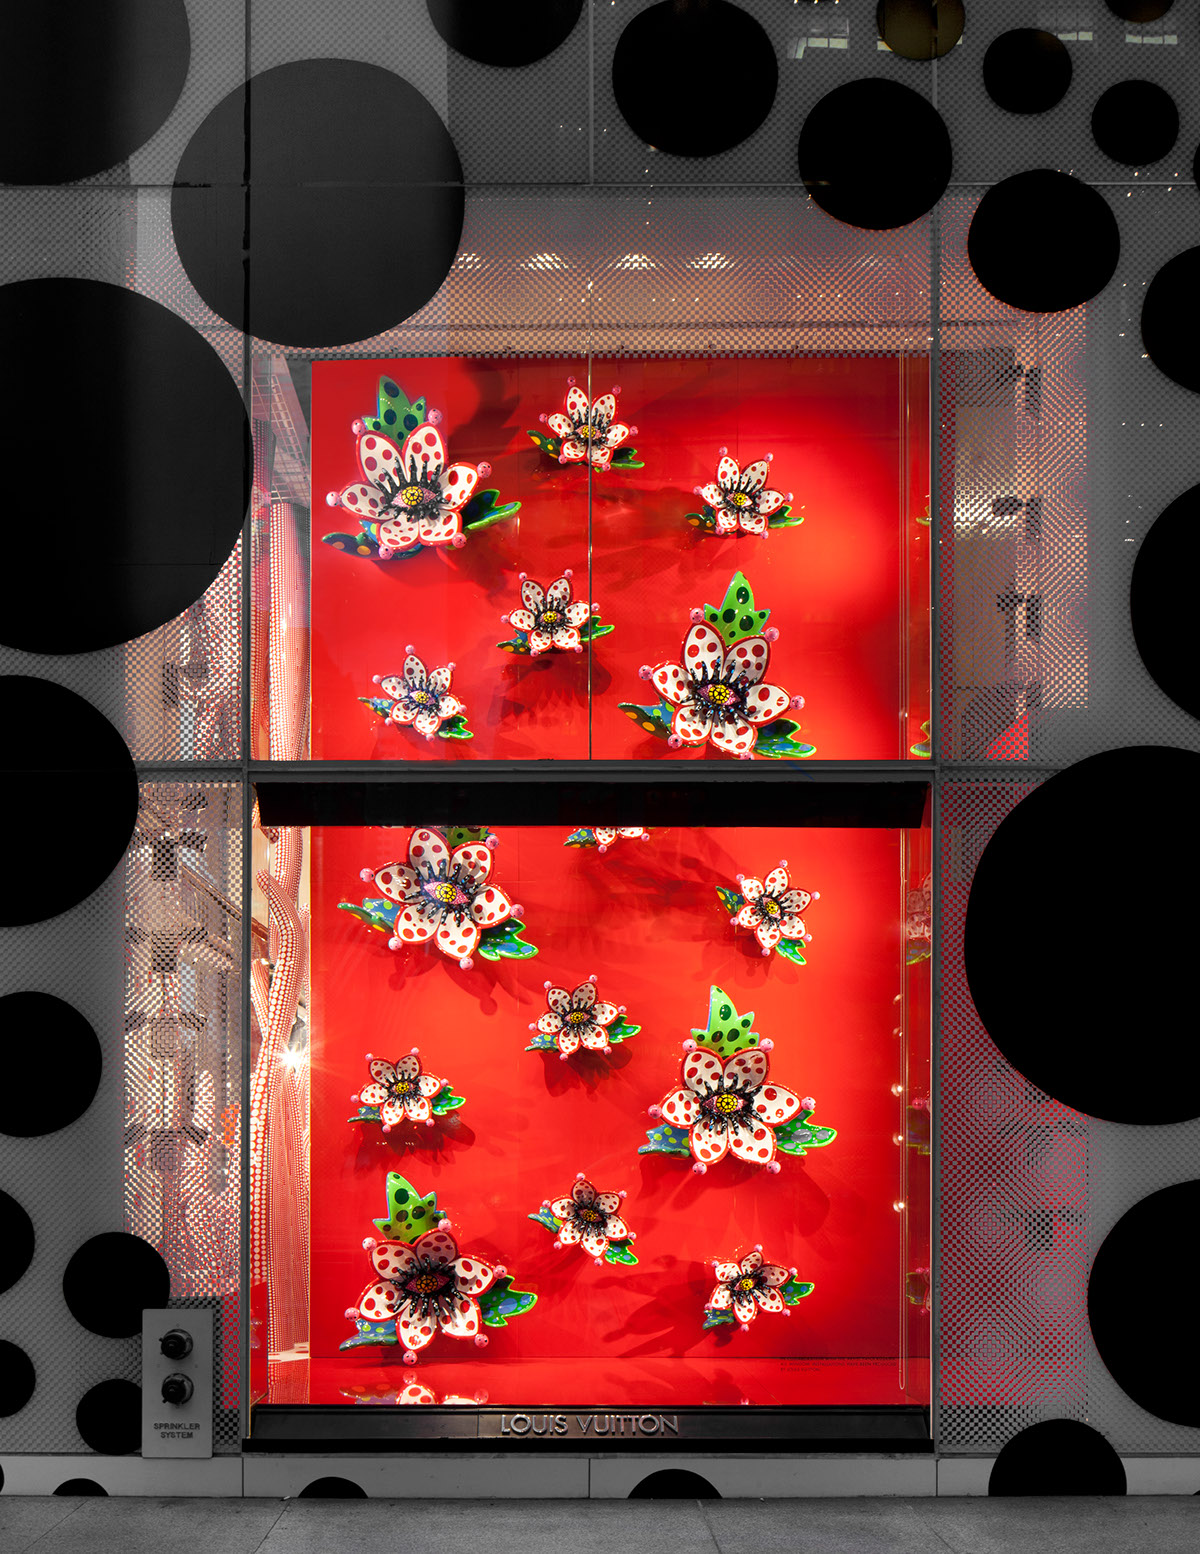 LouisVuitton window display in South Park mall in Charlotte, NC featuring  Yayoi Kusama's art